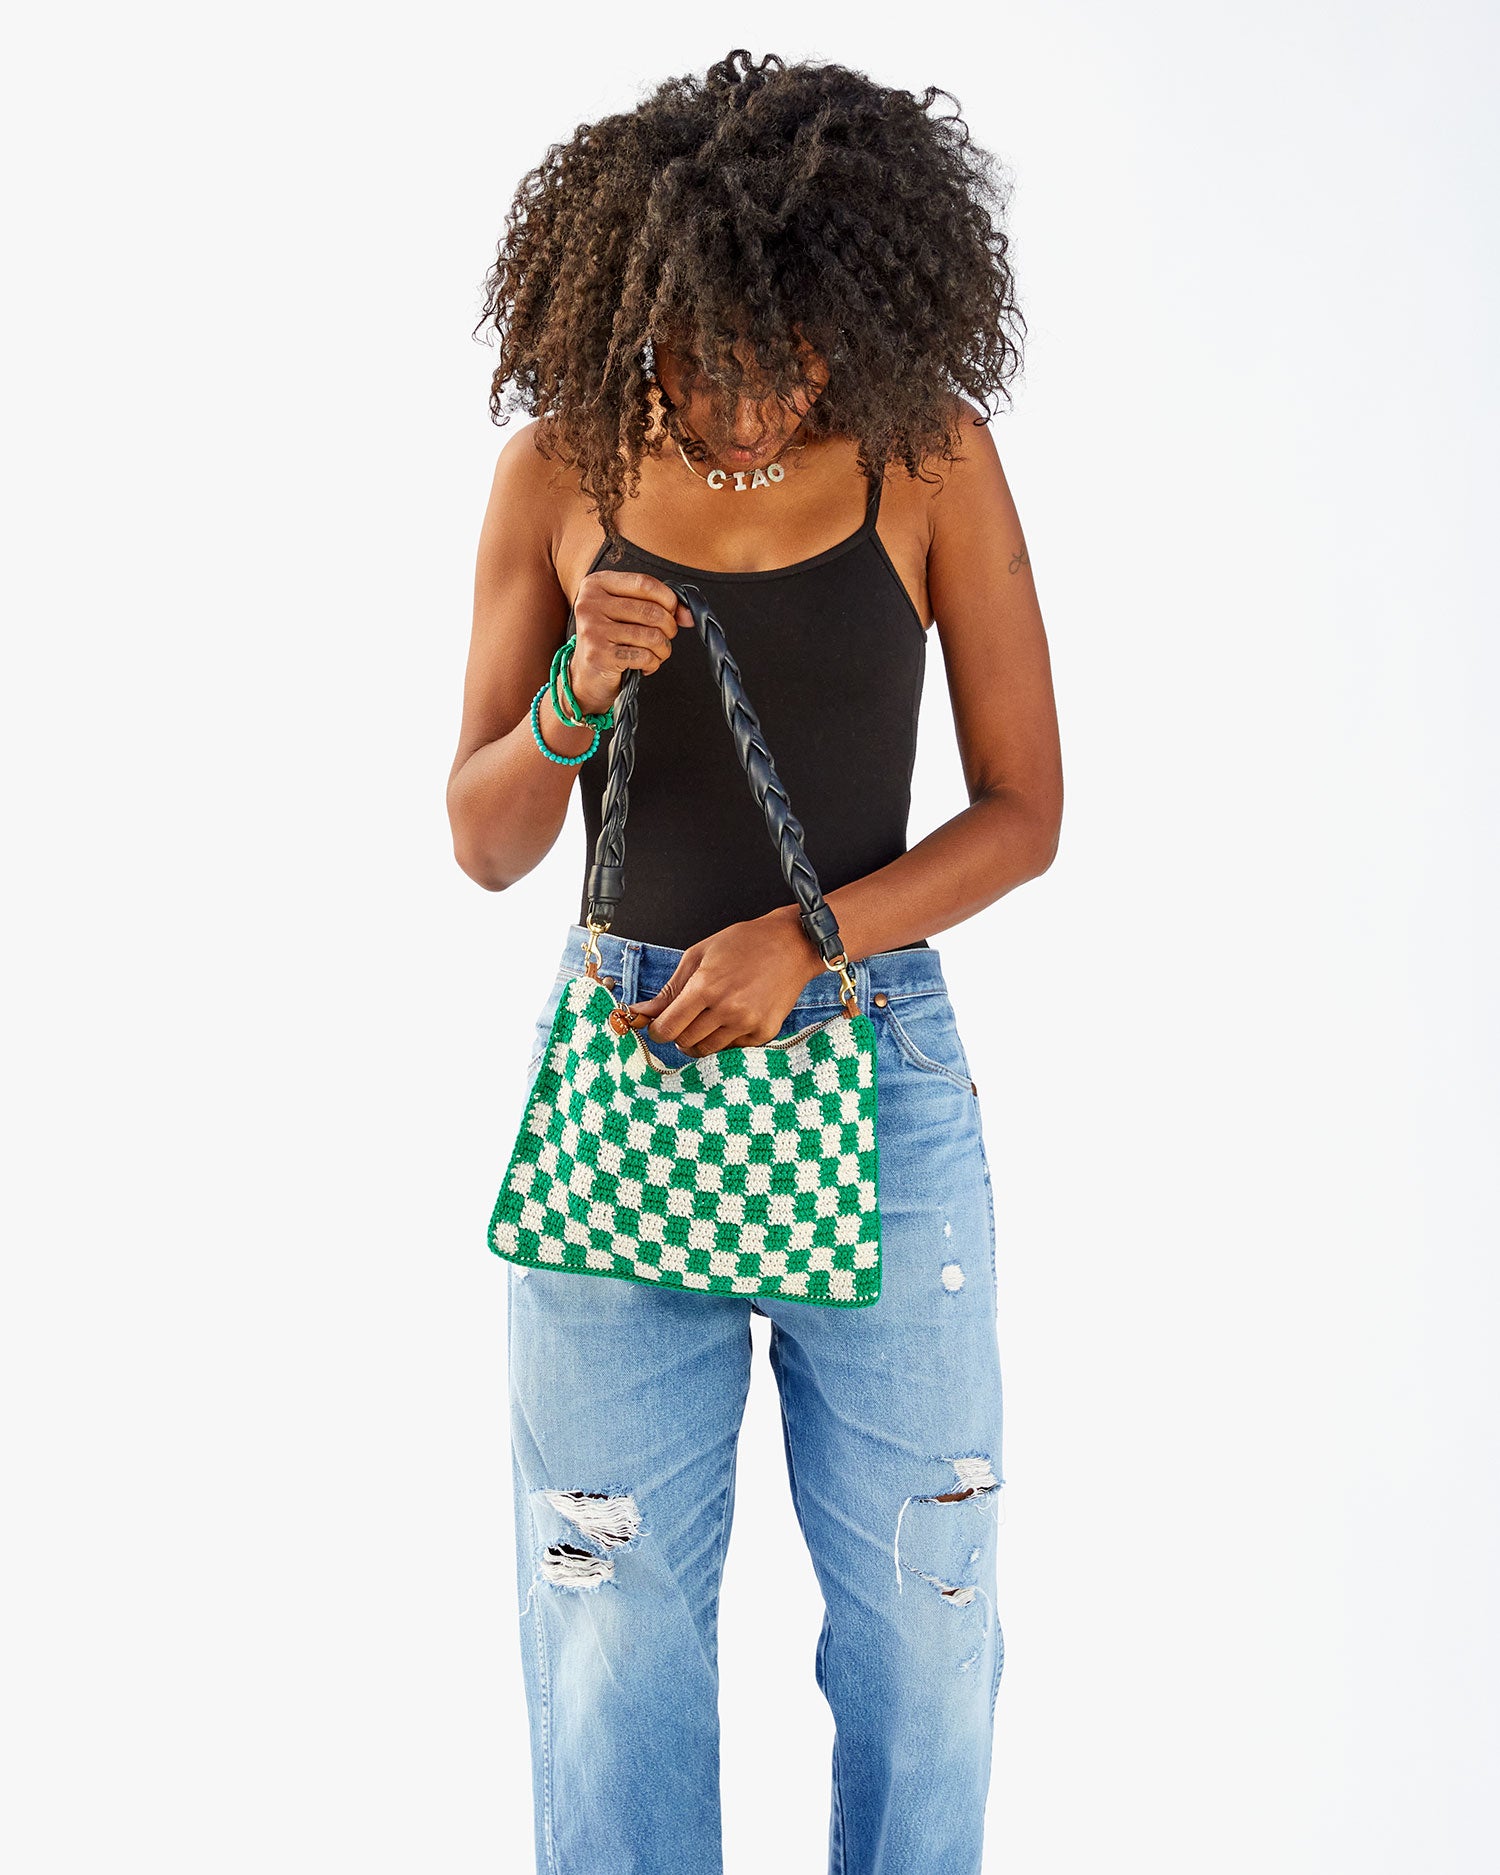 Mecca holding the Sea Green & Cream Crochet Checker Summer Flat Clutch with Tabs by the black braided leather shoulder strap